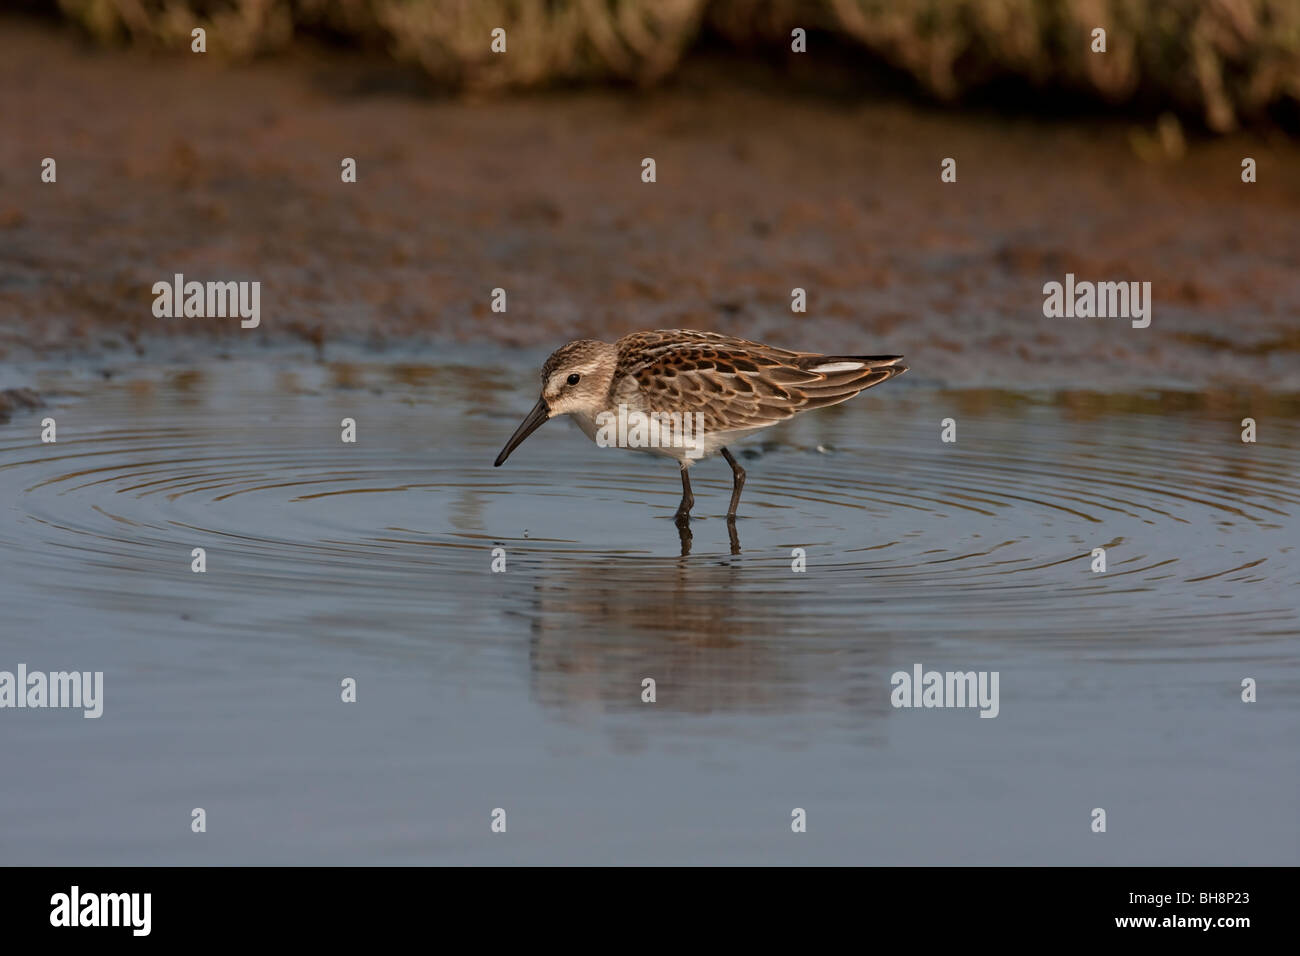 Western Sandpiper Calidris mauri standing in shallow water at Holden Creek Nanaimo River Estuary Vancouver Island BC Canada Stock Photo